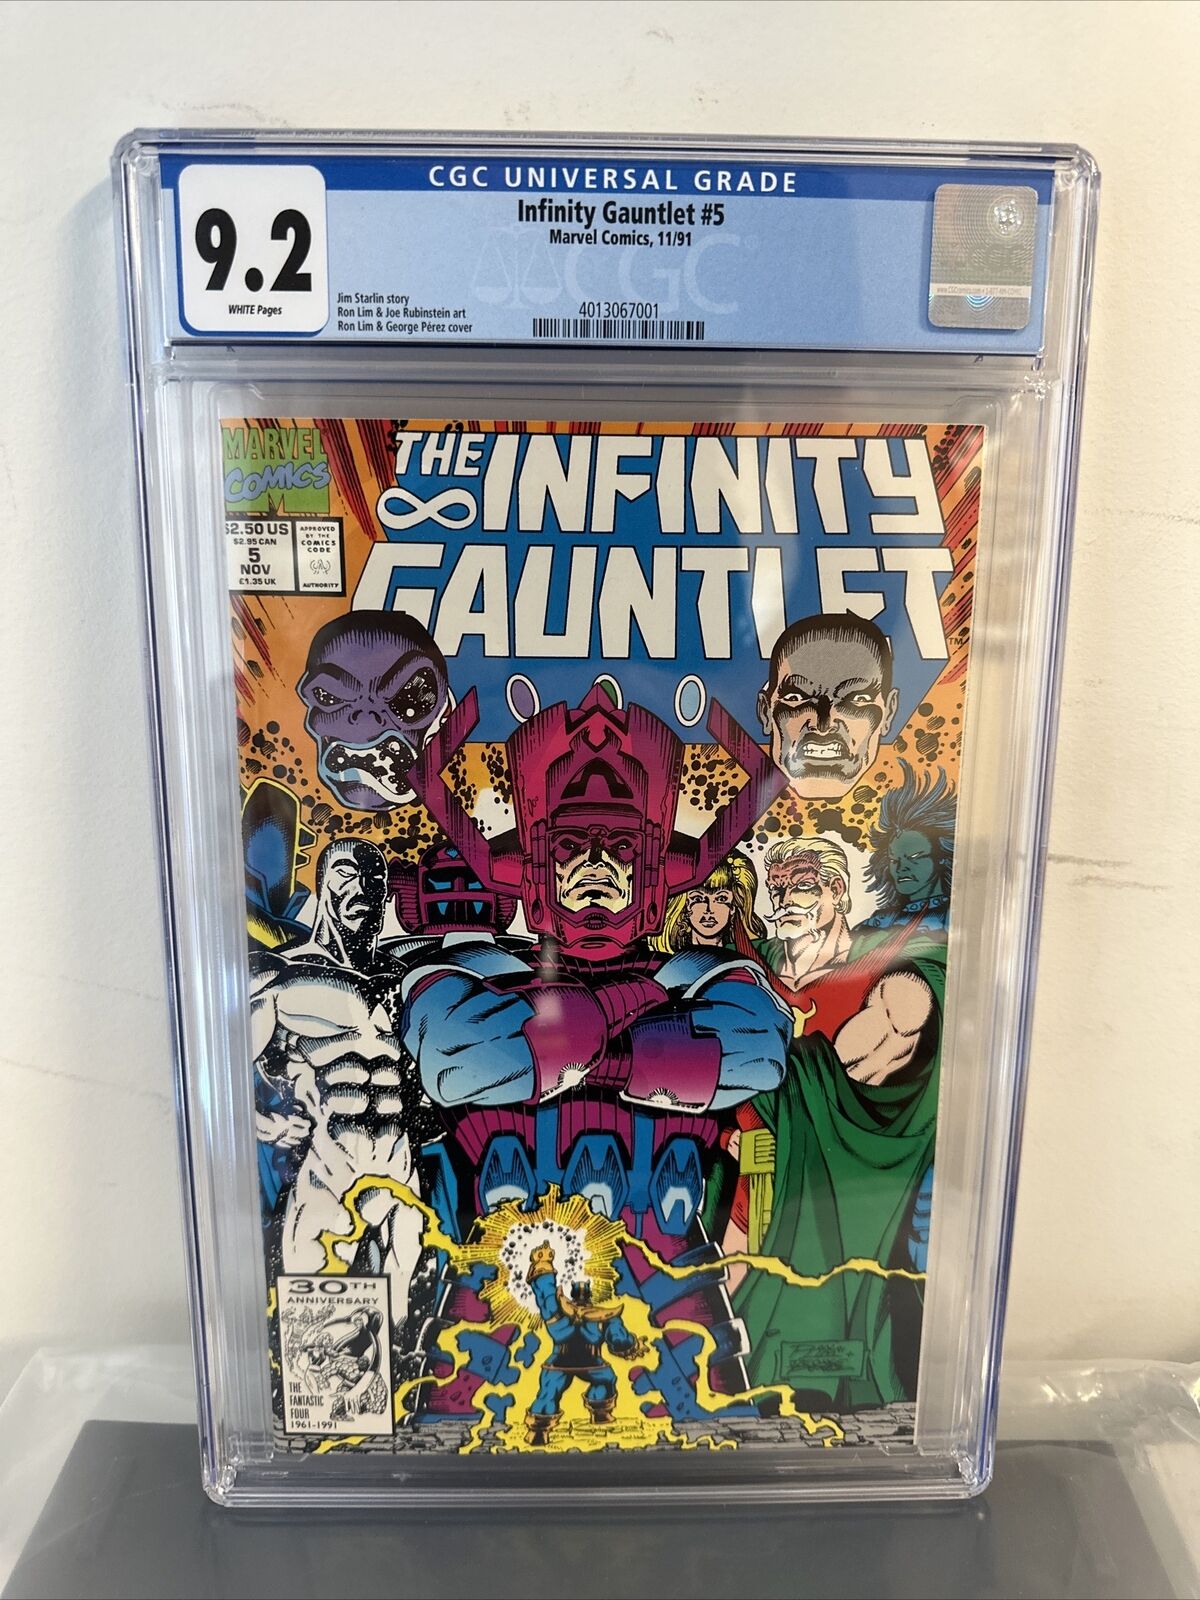 Infinity Gauntlet #5 CGC 9.2 (1991) - Galactus 11/91 White Pages